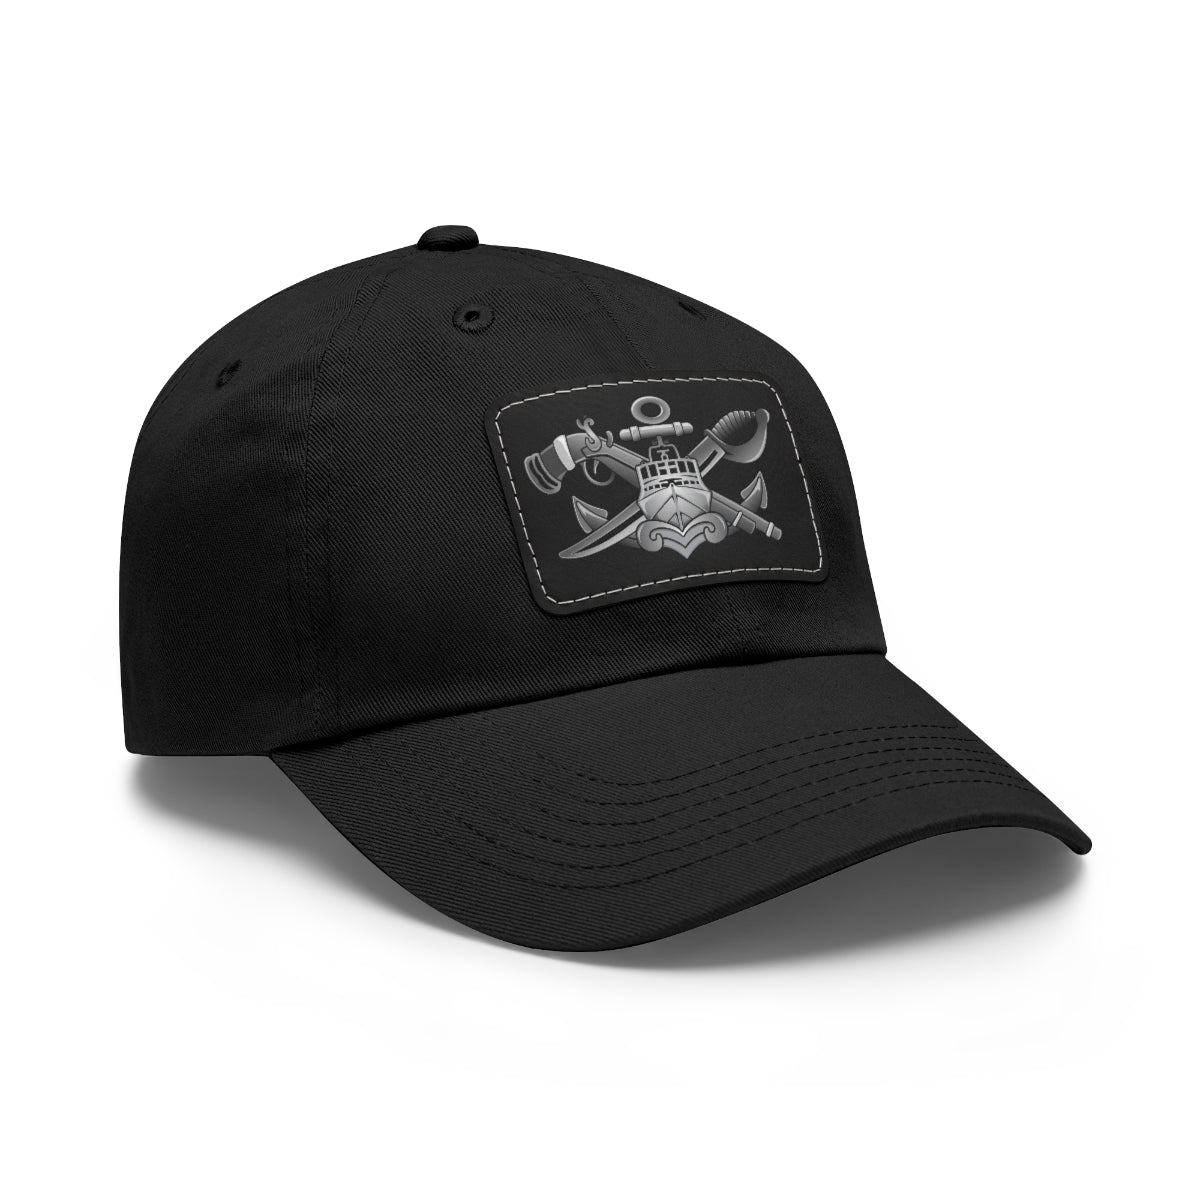 SWCC Senior Hat with Leather Patch